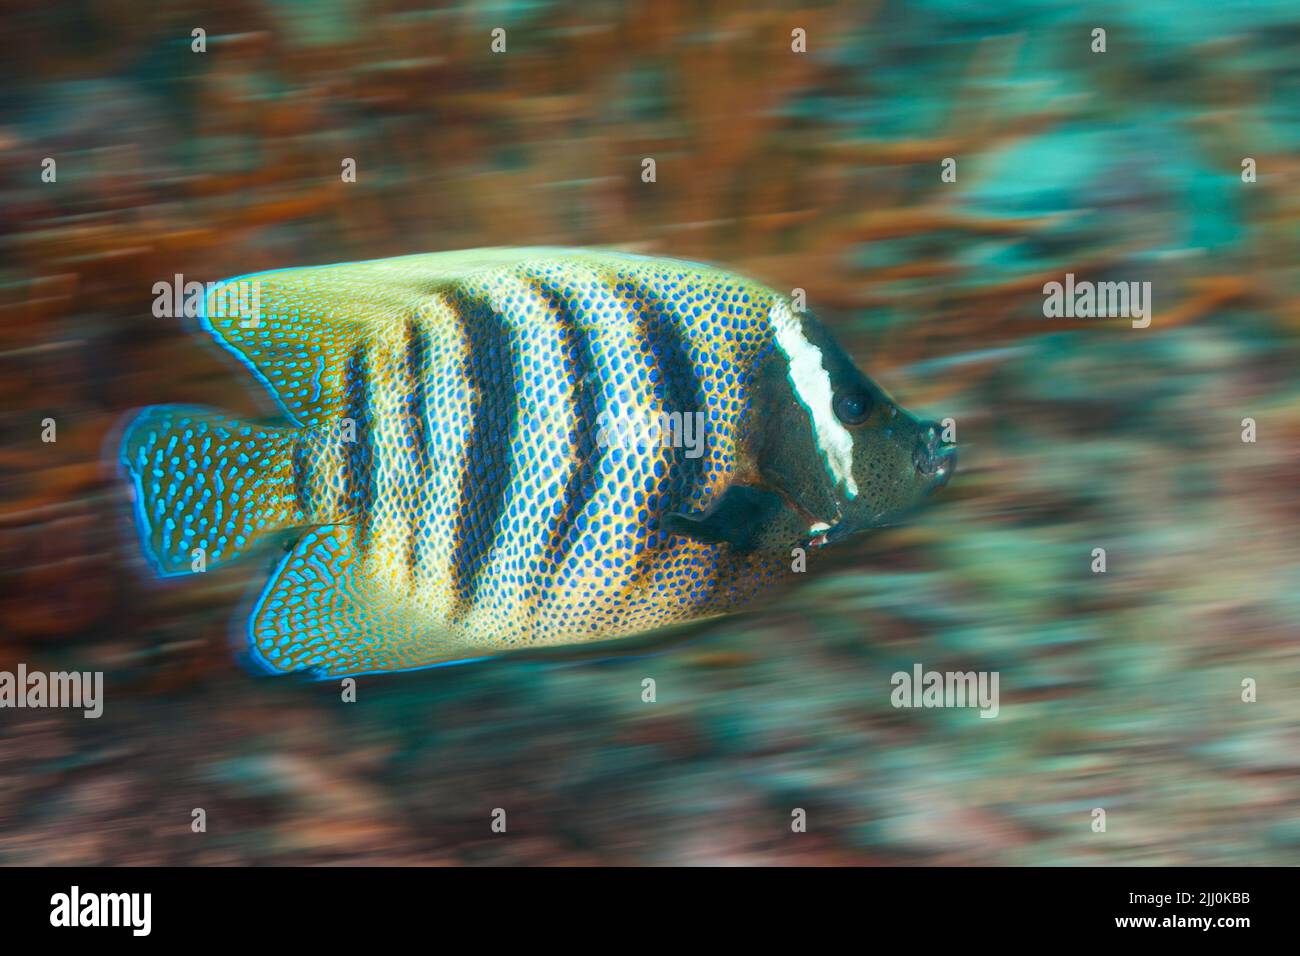 A motion blurred image of a six-banded Angelfish, Holacanthus sexstriatus, on a reef off the island of Yap, Micronesia. Stock Photo